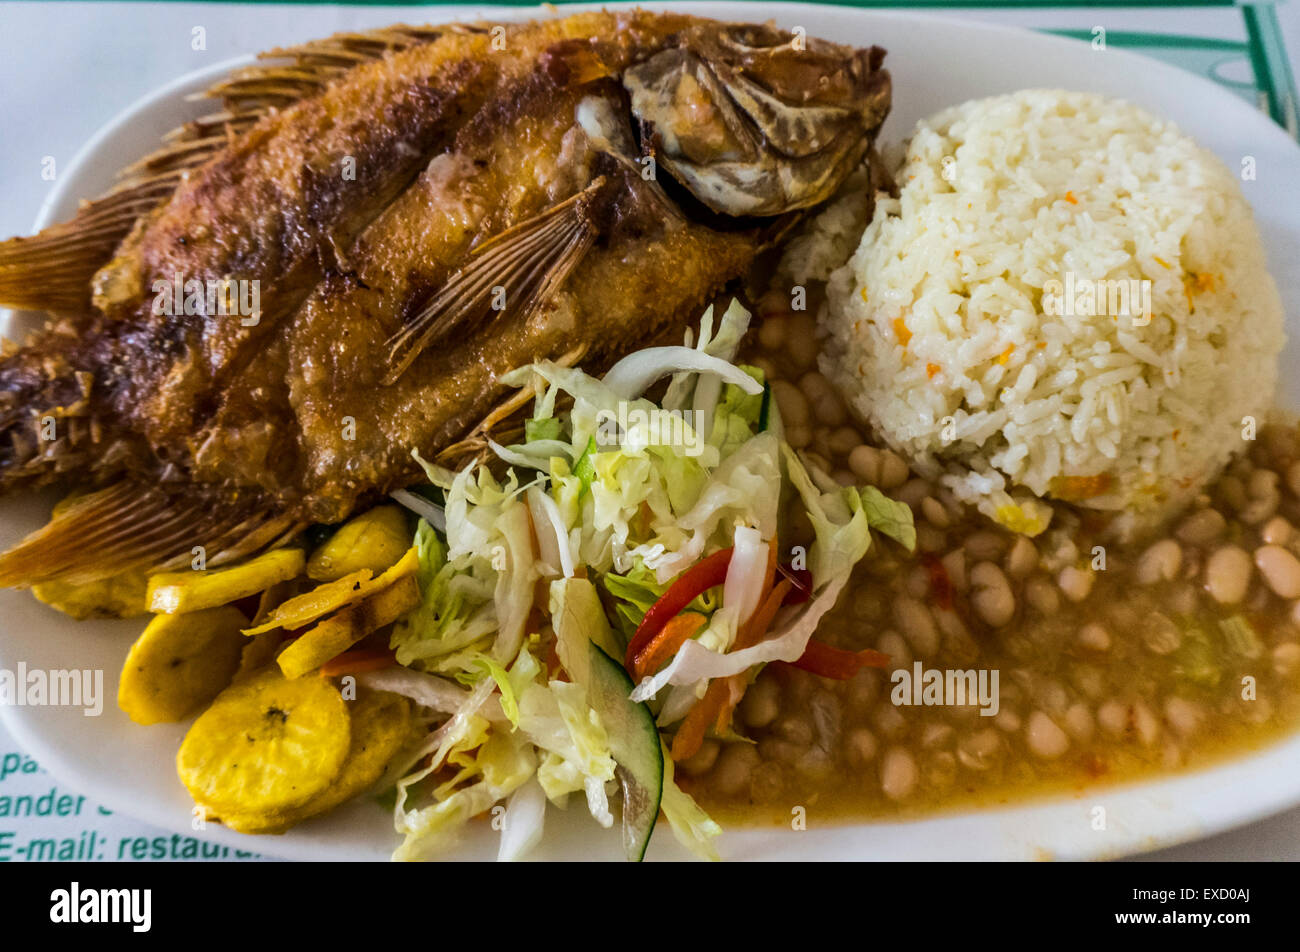 A Typical Meal Of Fried Fish And Coconut Rice In The Caribbean Stock Photo Alamy,Work From Home Jobs